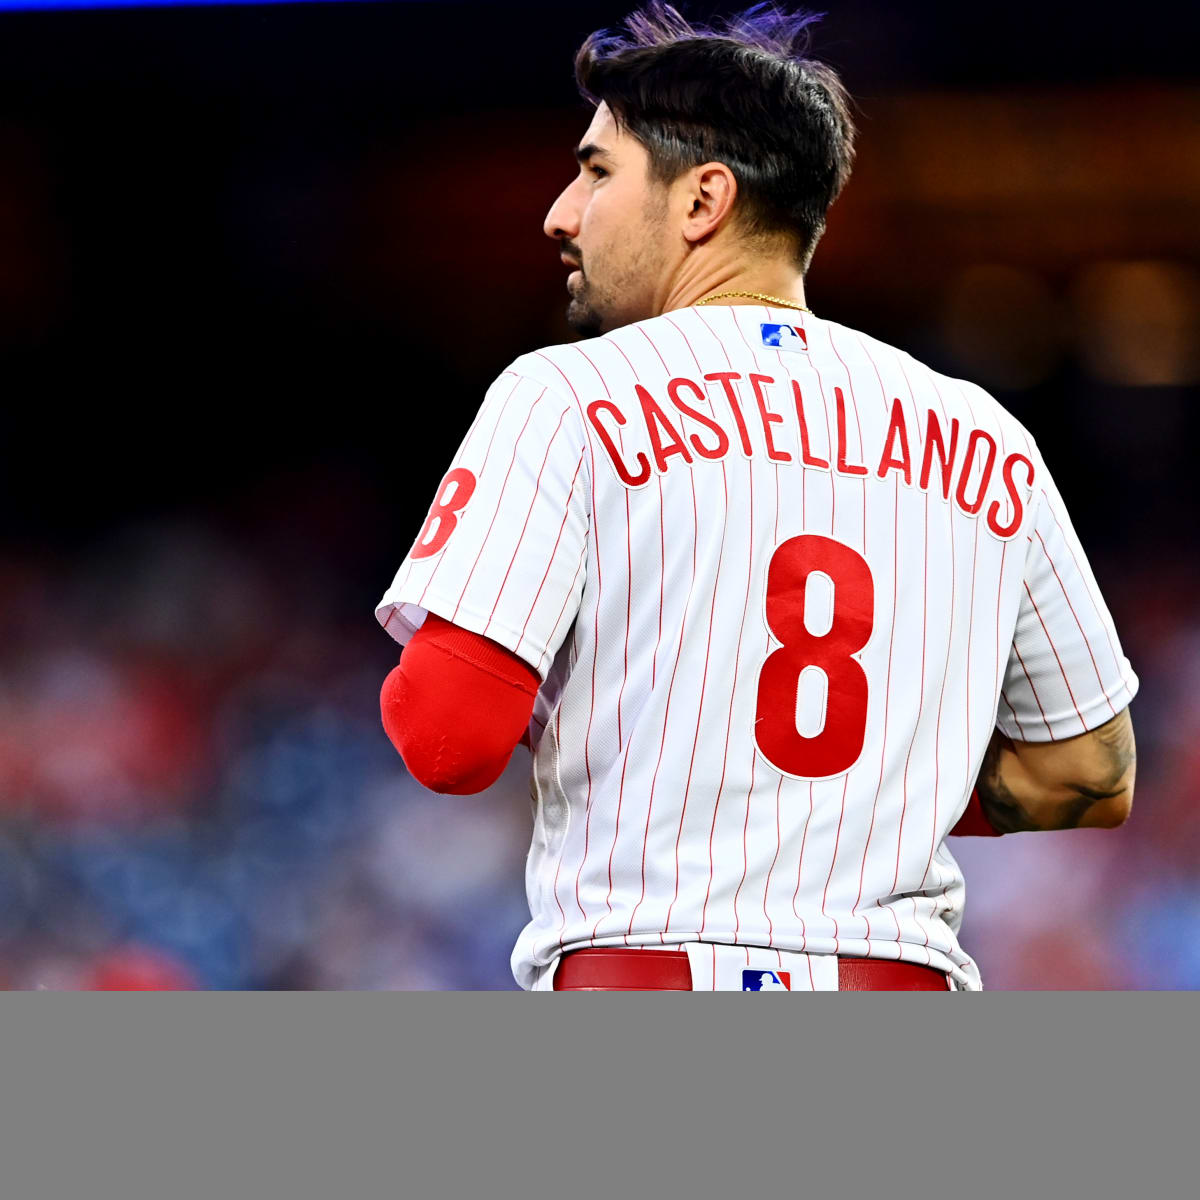 Please Pay Attention To Nick Castellanos